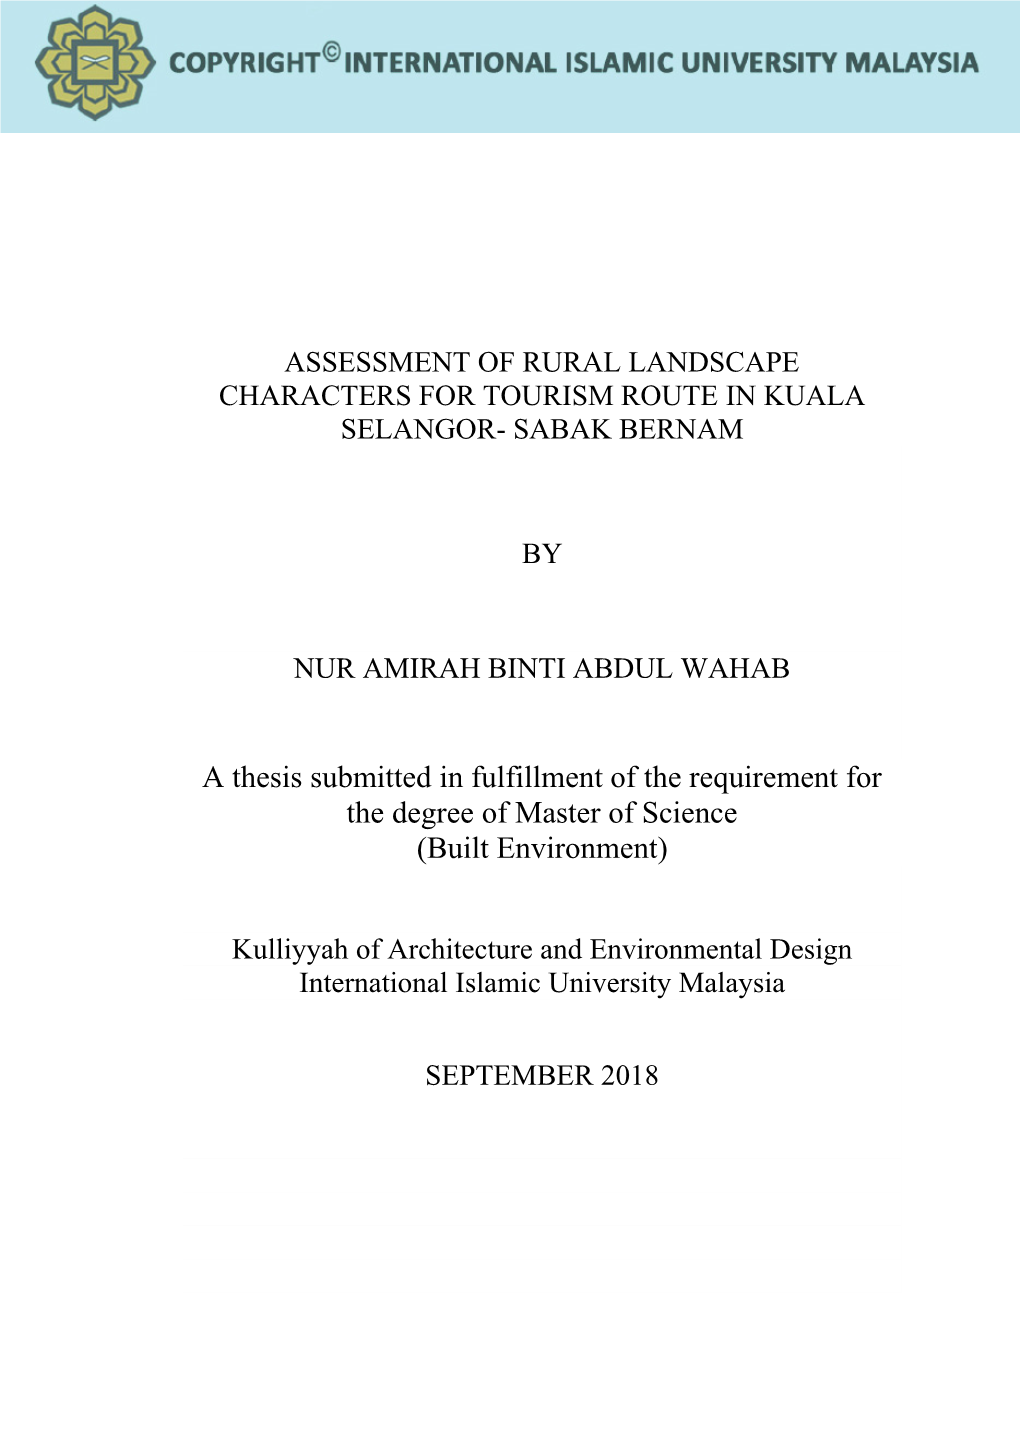 A Thesis Submitted in Fulfillment of the Requirement for the Degree of Master of Science (Built Environment)